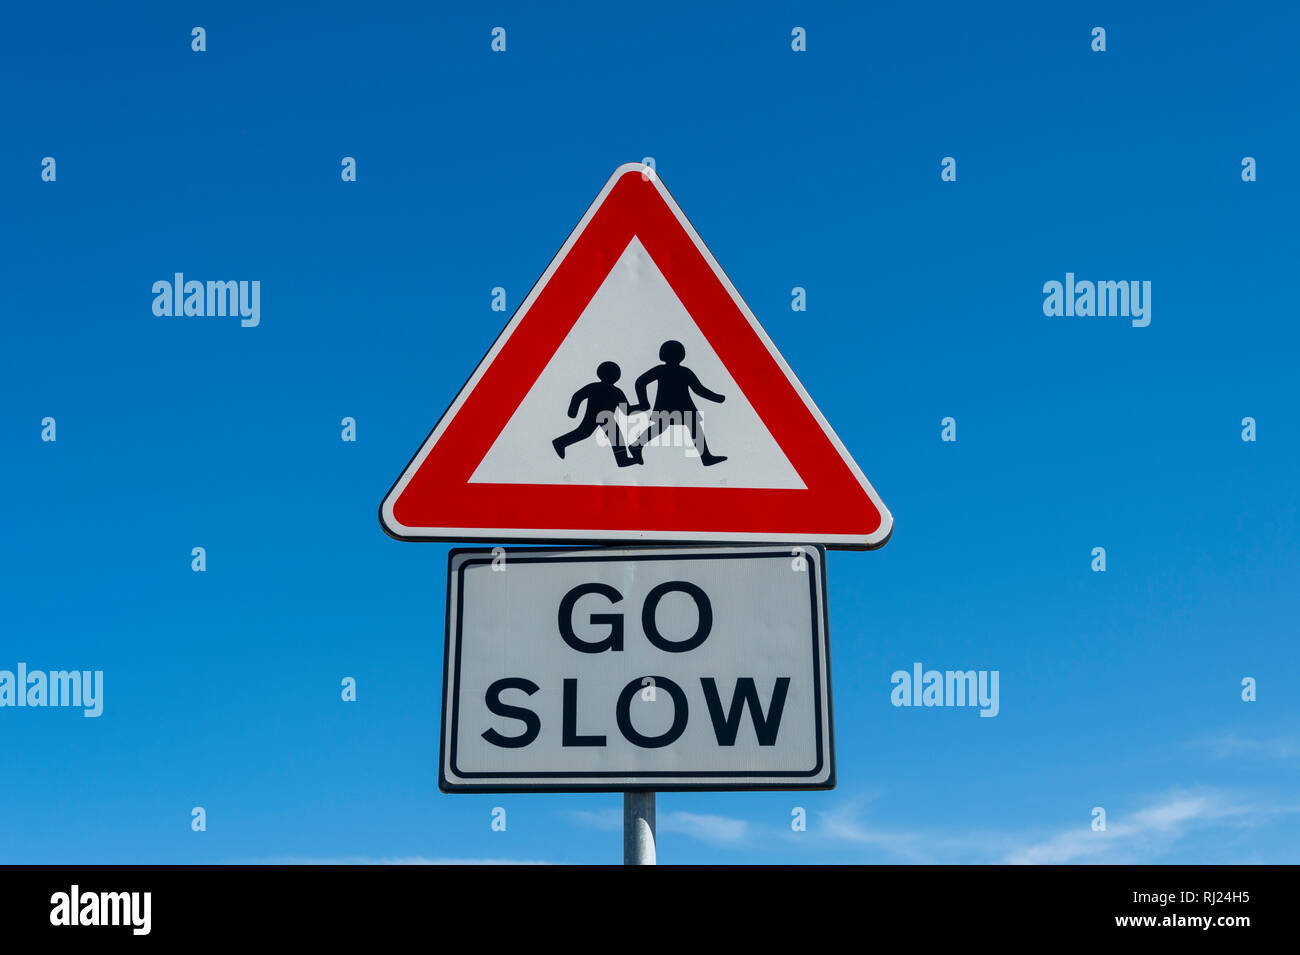 children crossing, go slow warning sign against a blue sky background Stock Photo